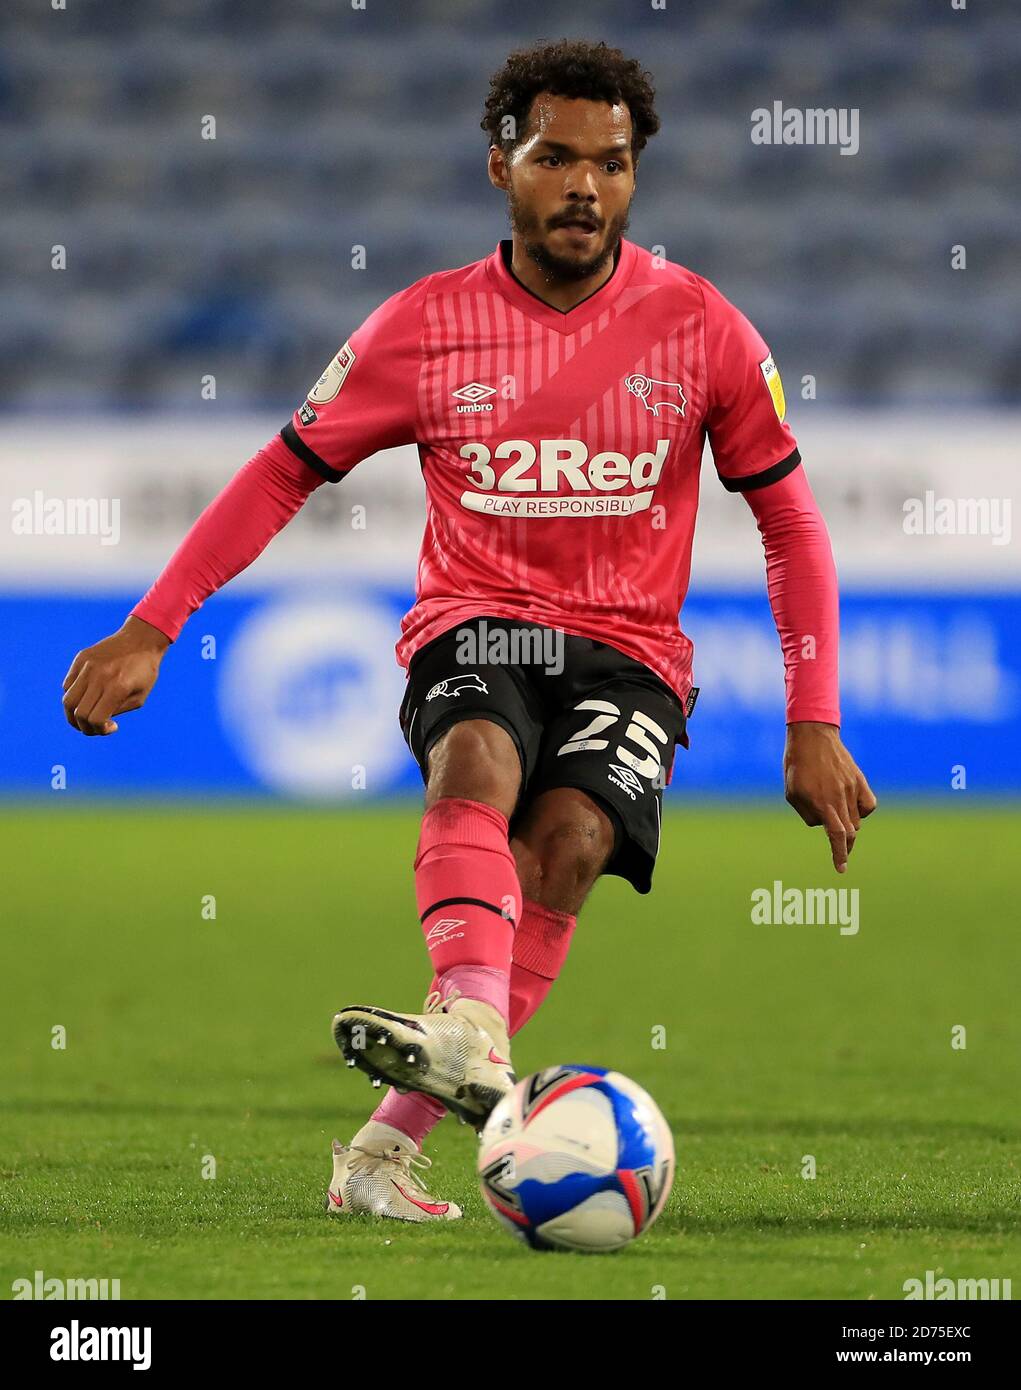 Derby County's Duane Holmes in action during the Sky Bet Championship match at The John Smith's Stadium, Huddersfield. Stock Photo